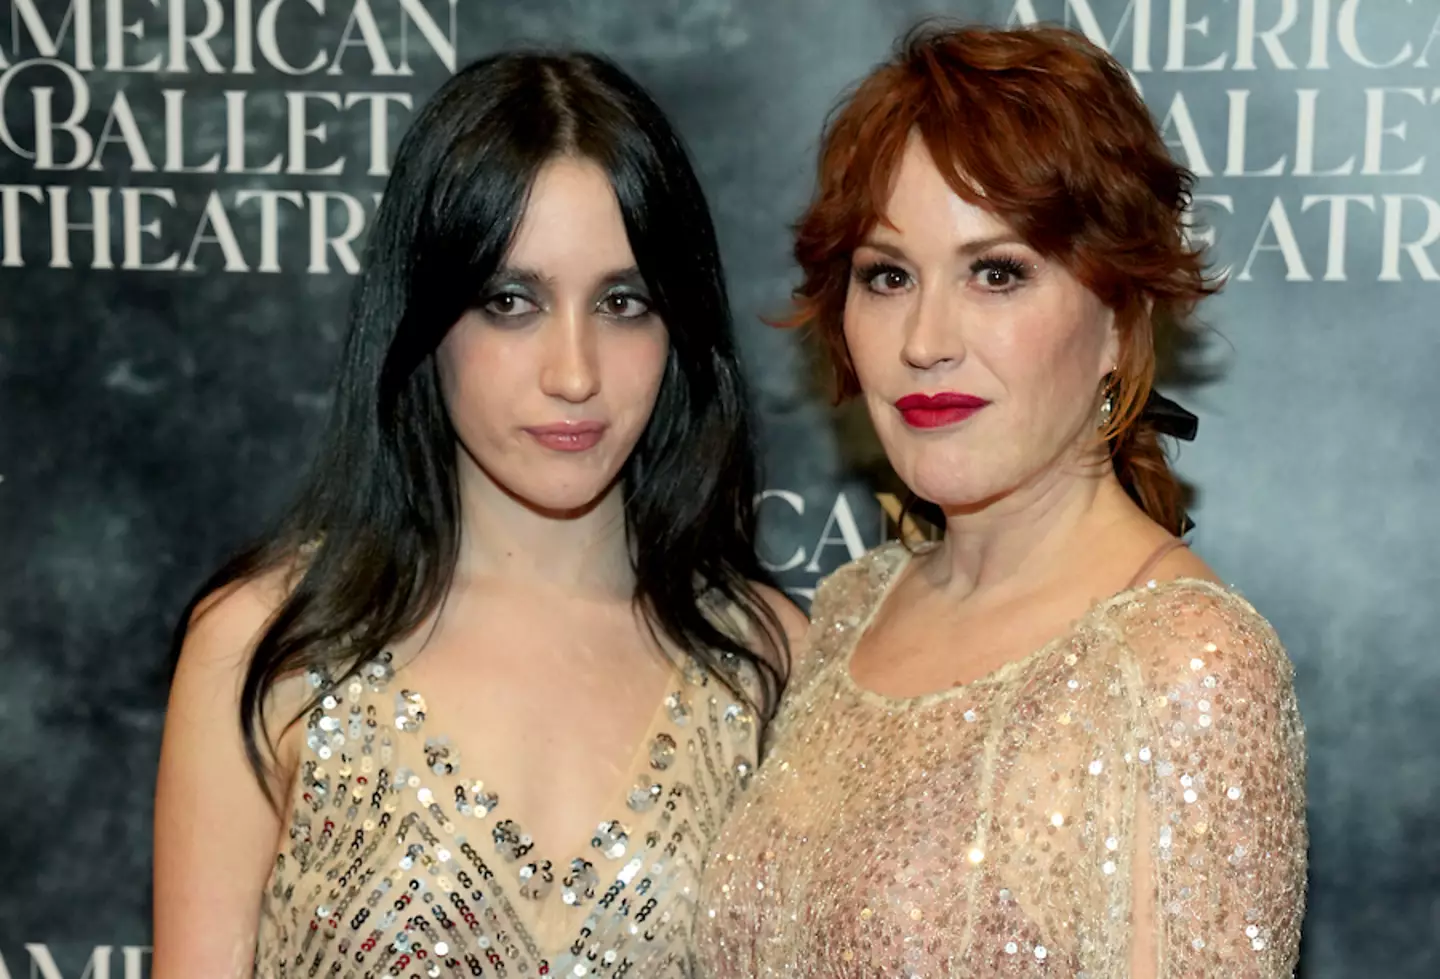 Molly Ringwald has slammed criticism of 'nepo babies' while crediting her daughter for pursuing her own acting career.